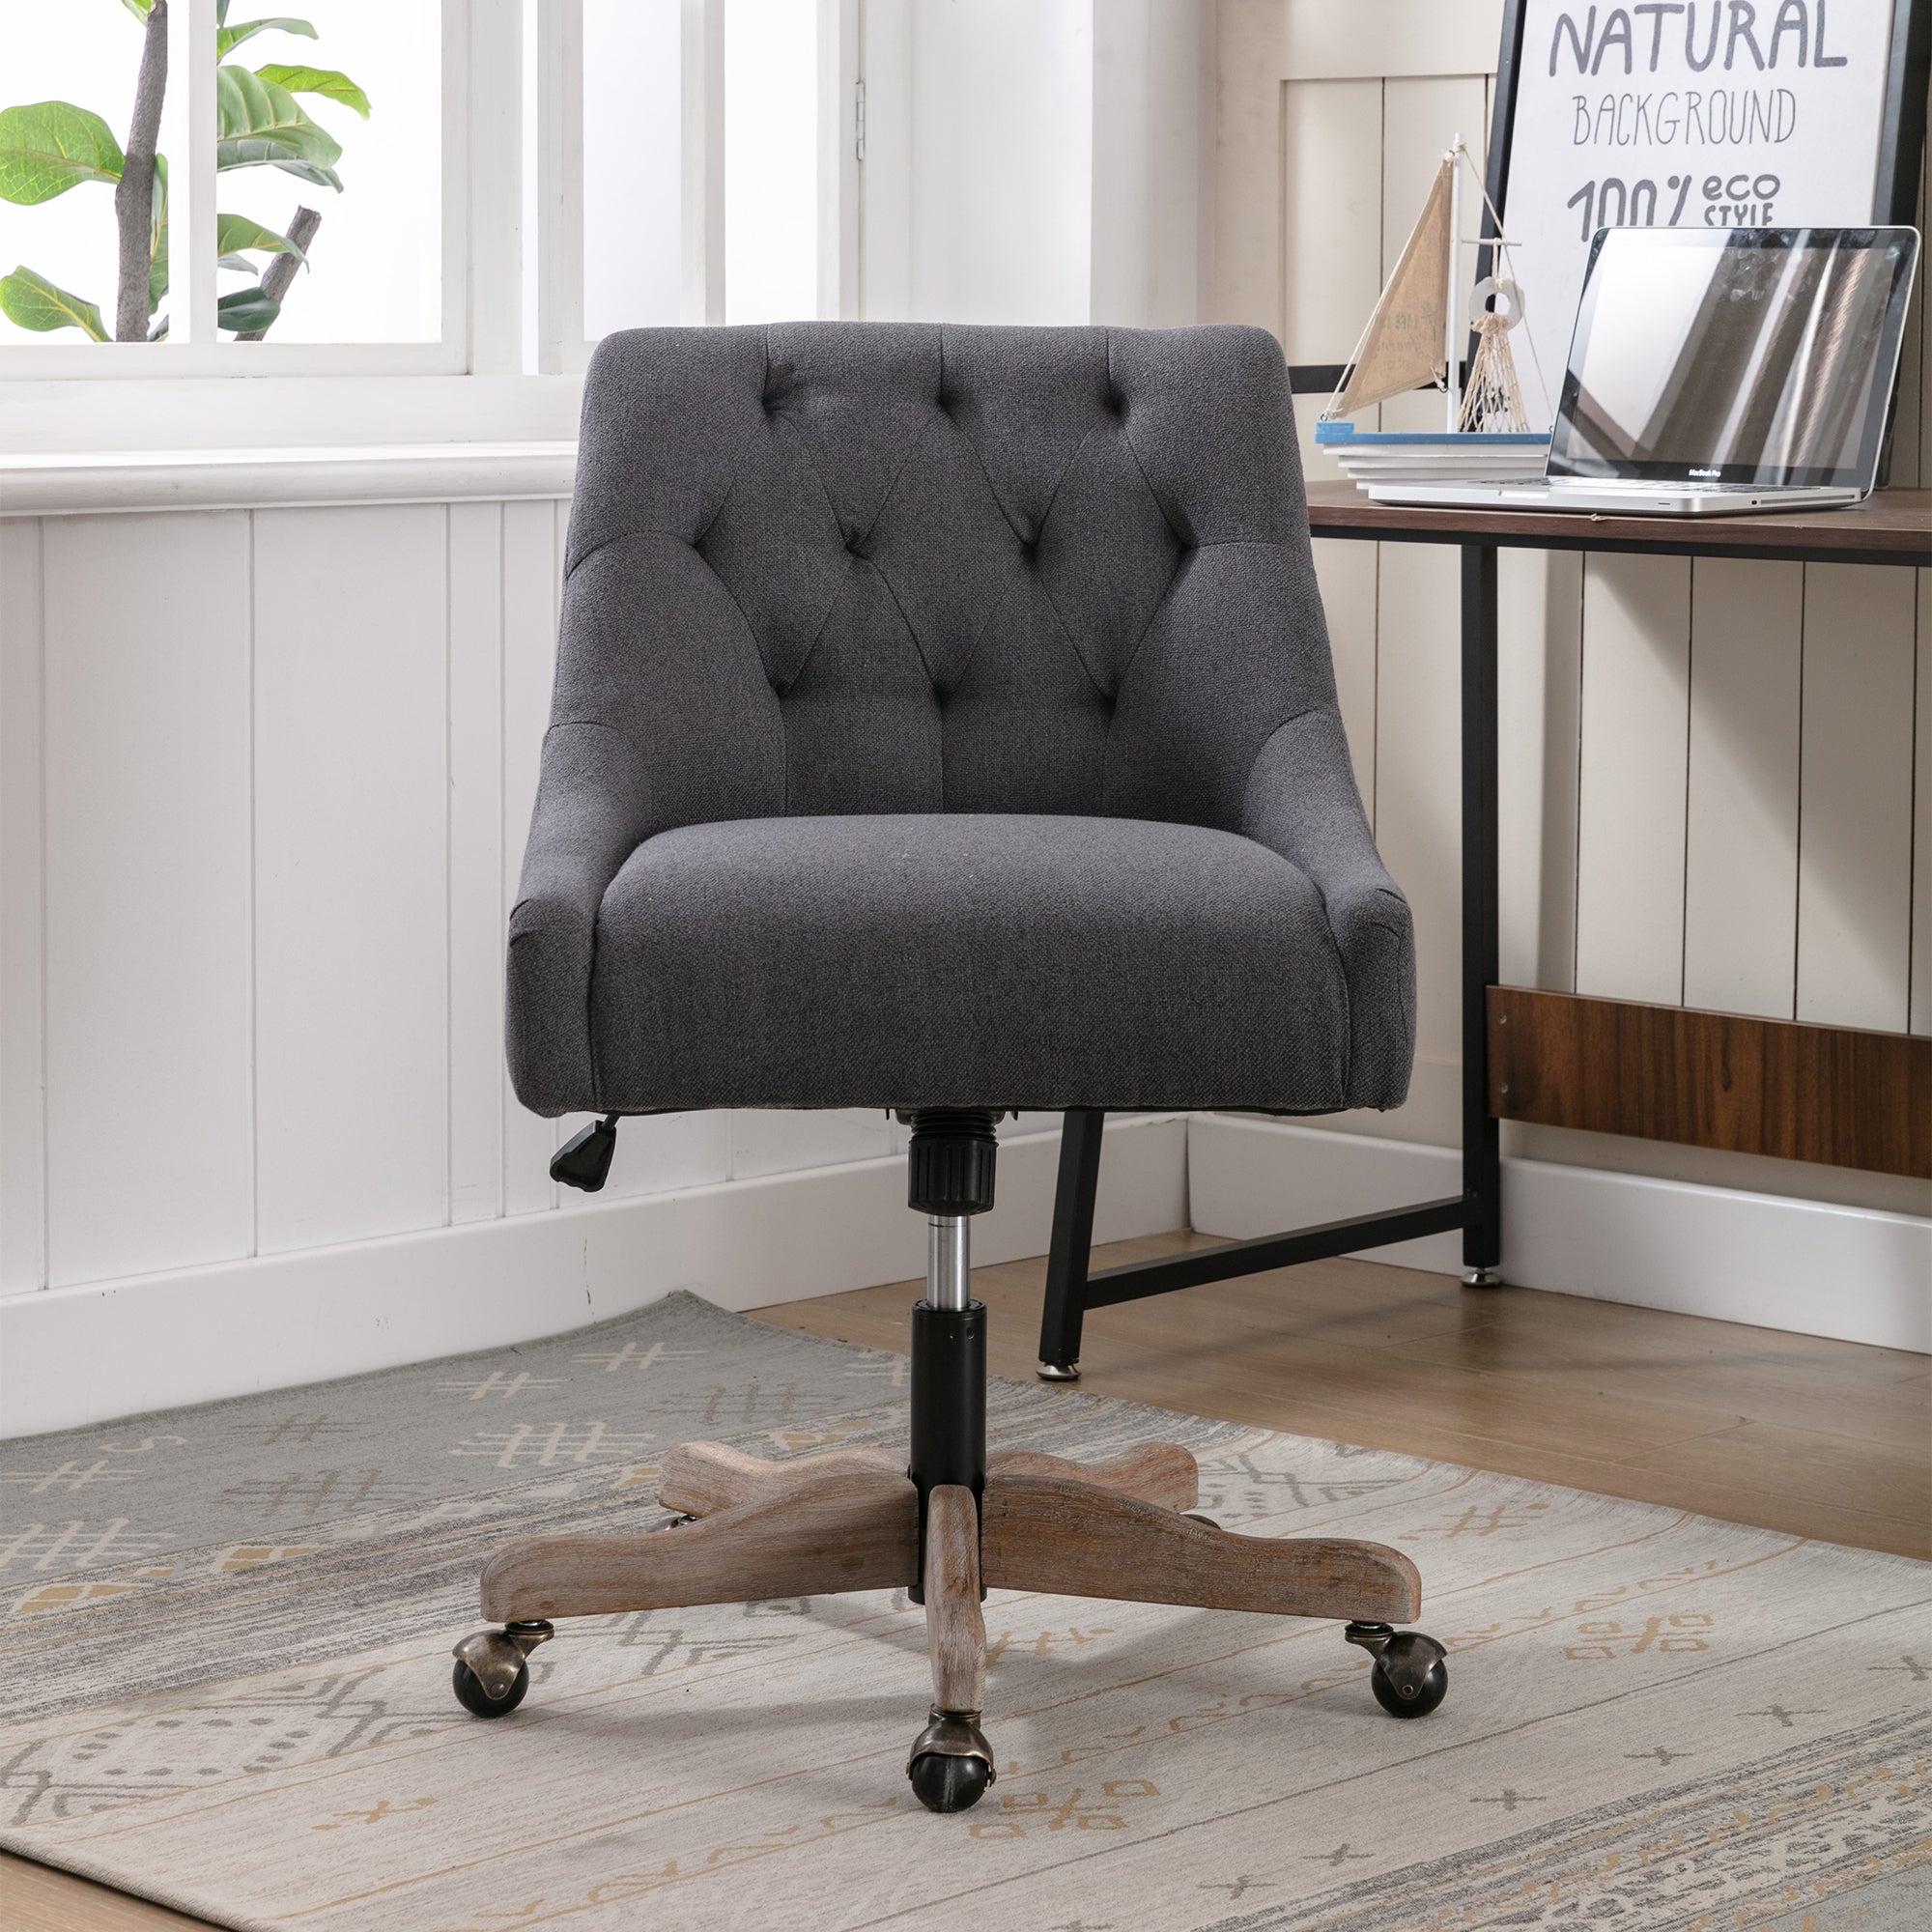 COOLMORE Swivel Shell Chair for Living Room Modern charcoal grey-solid wood